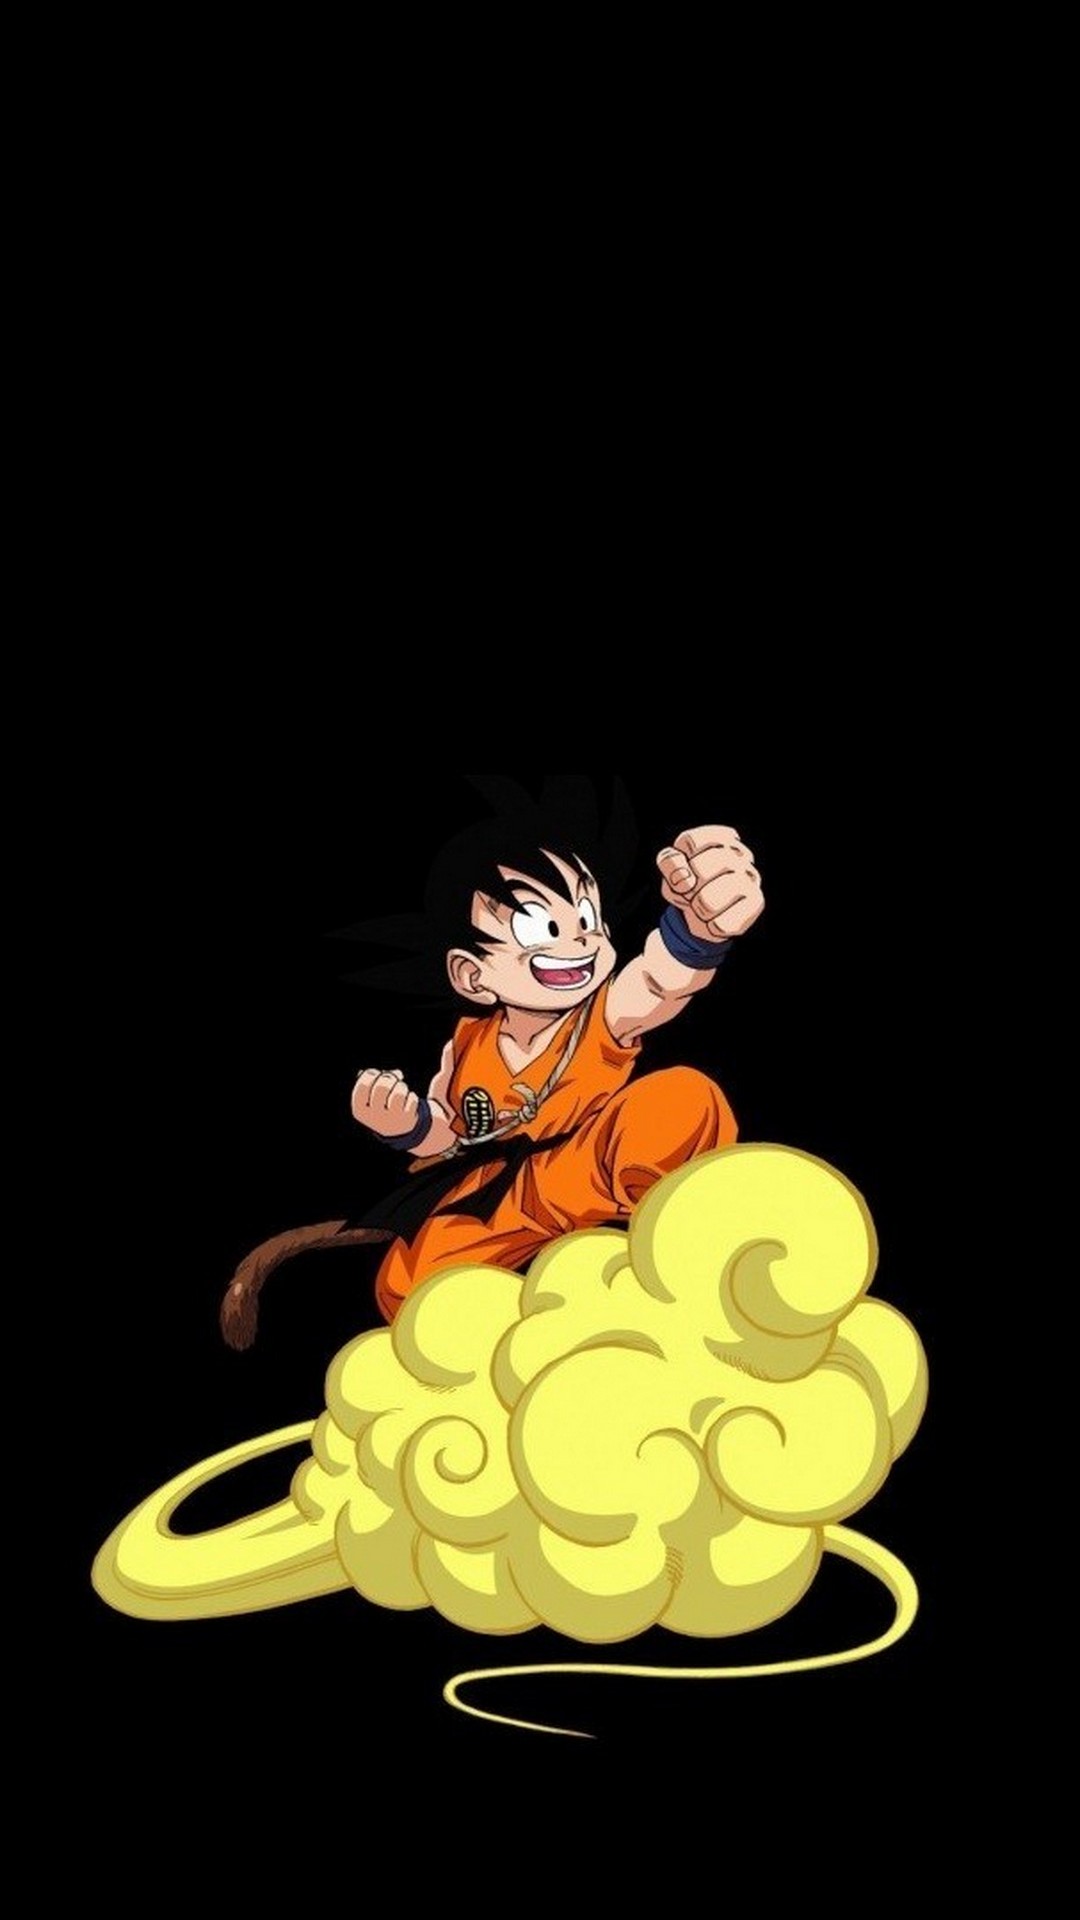 Wallpaper Kid Goku Android with HD resolution 1080x1920